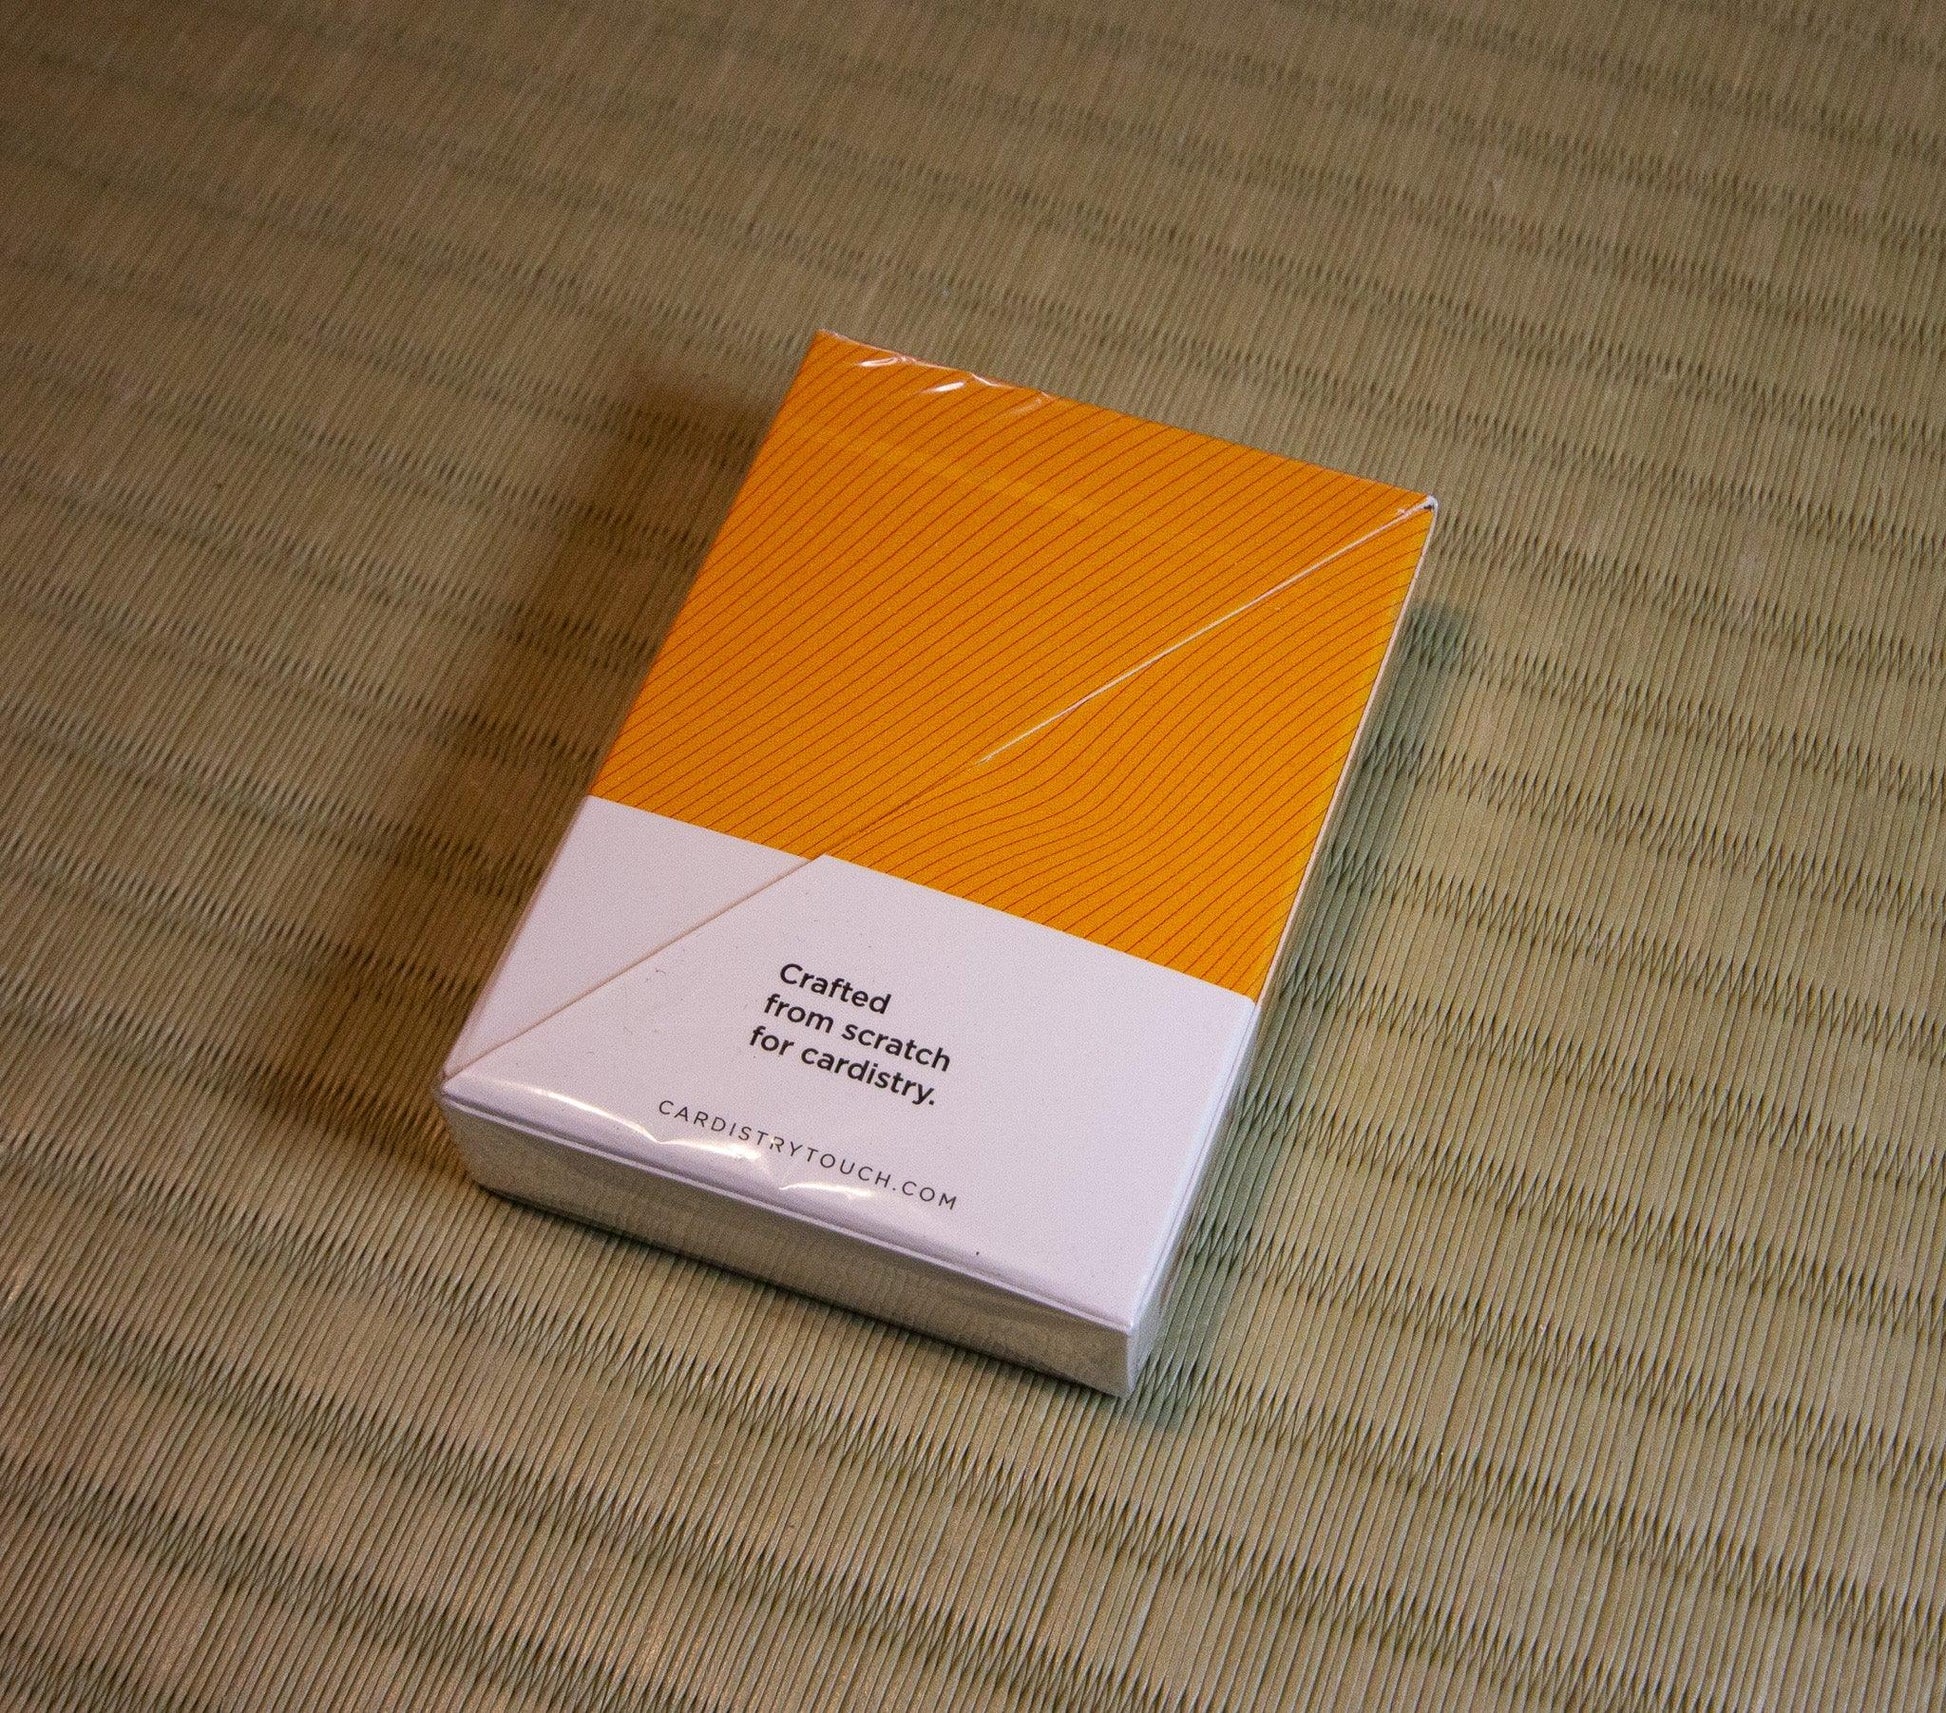 Derive Honey Edition Playing Cards by Cardistry Touch - Deckita Decks